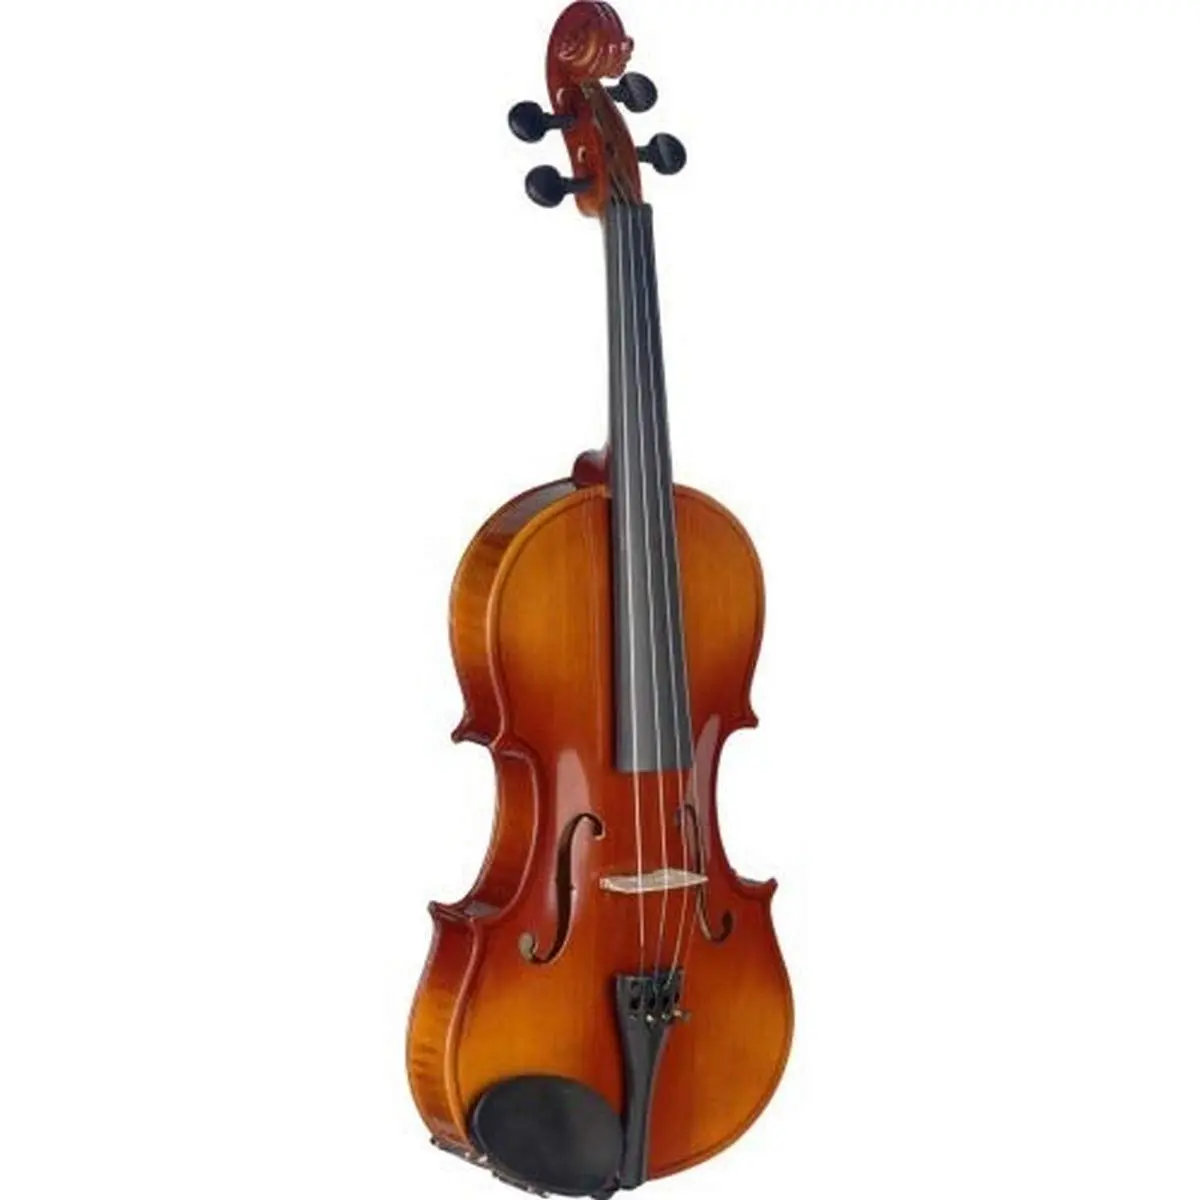 stagg violin - Are Stagg violins any good